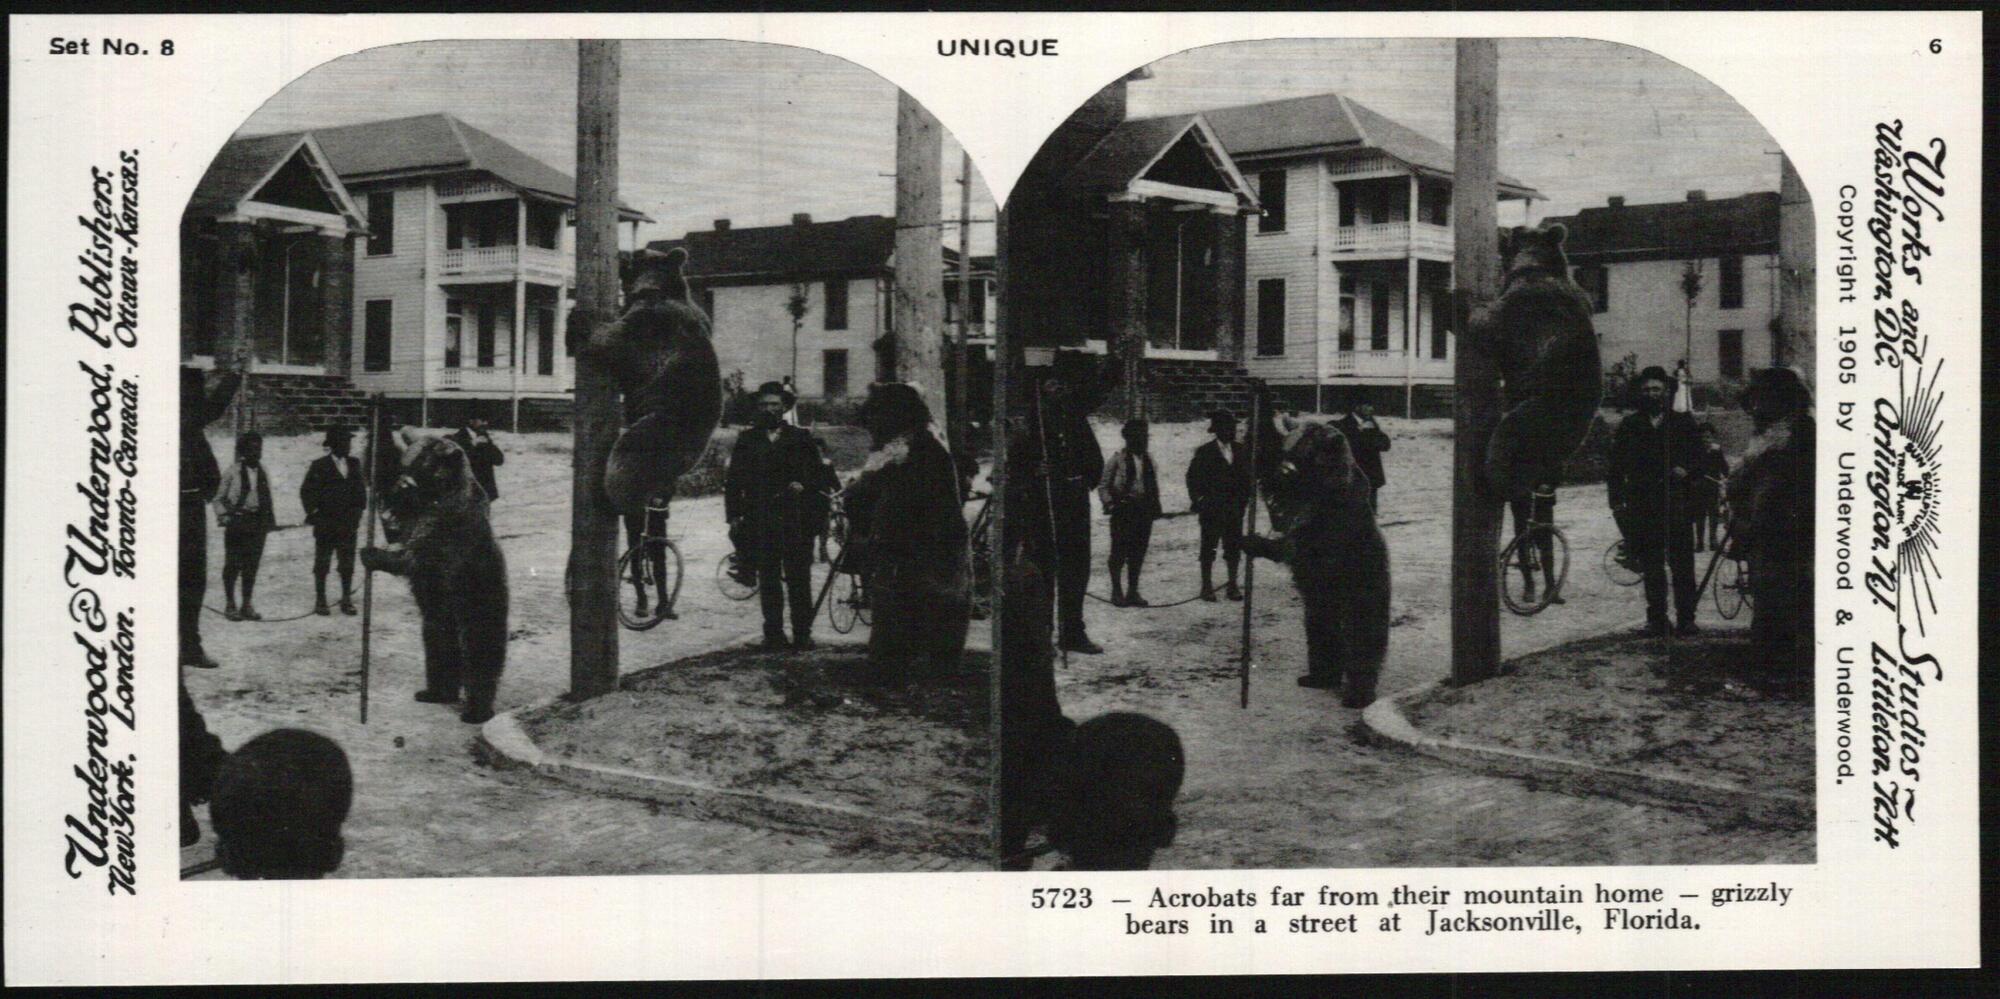 This black and white stereoscopic image features two images of three bears performing in a street with men standing around them and watching.  It is surrounded by the text: Set No. 8; Underwood &amp; Underwood, Publishers, Unique; 5723—Acrobats far from their mountain home—grizzly bears in a street at Jacksonville, Florida.<br />